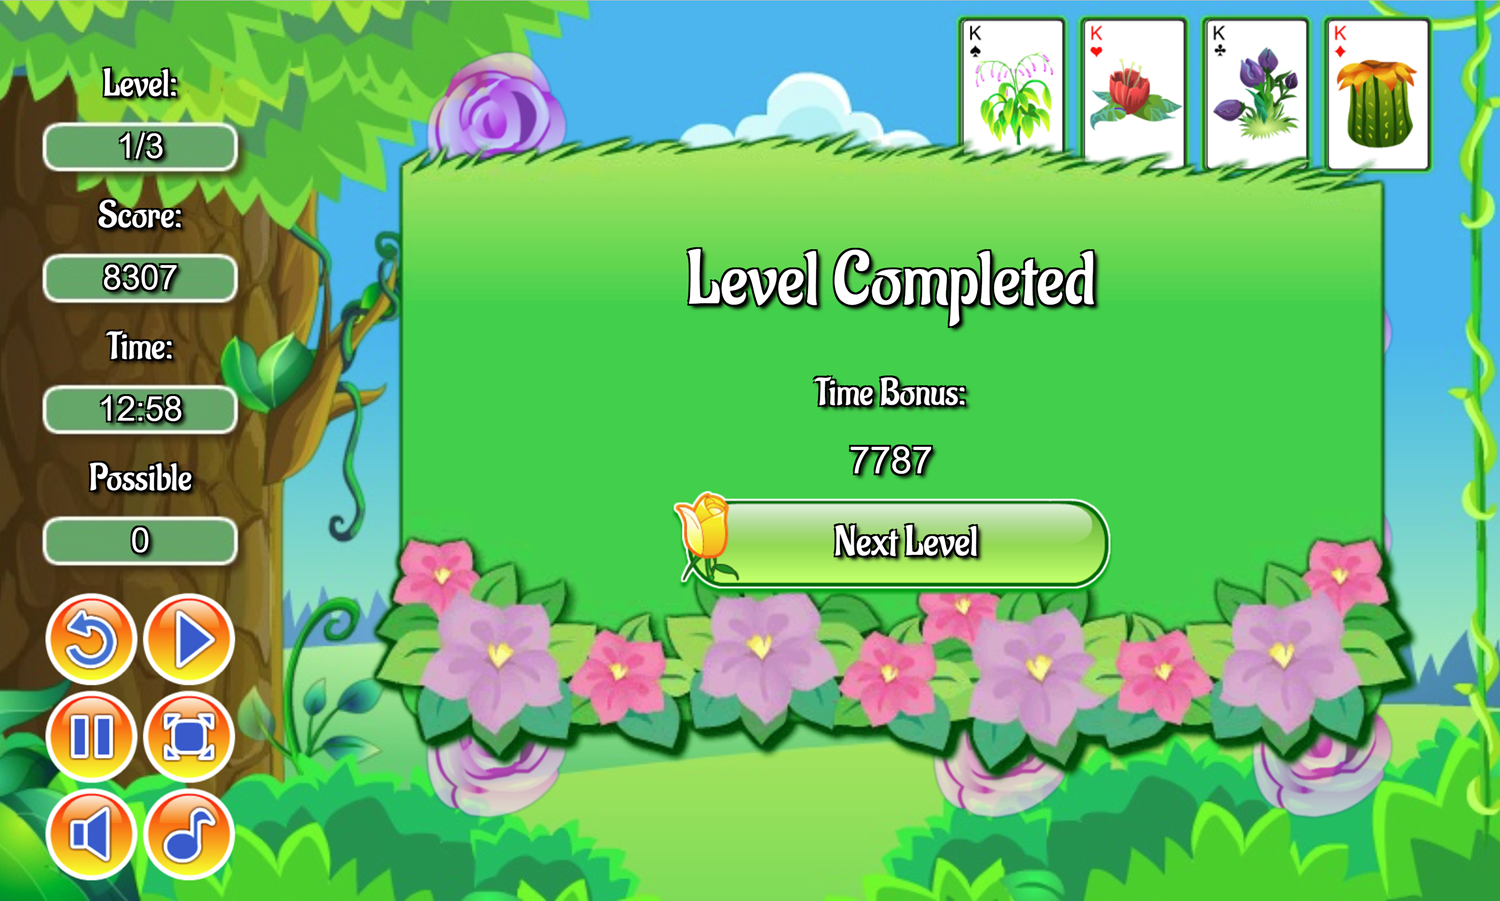 Flower Solitaire Game Level Completed Screen Screenshot.